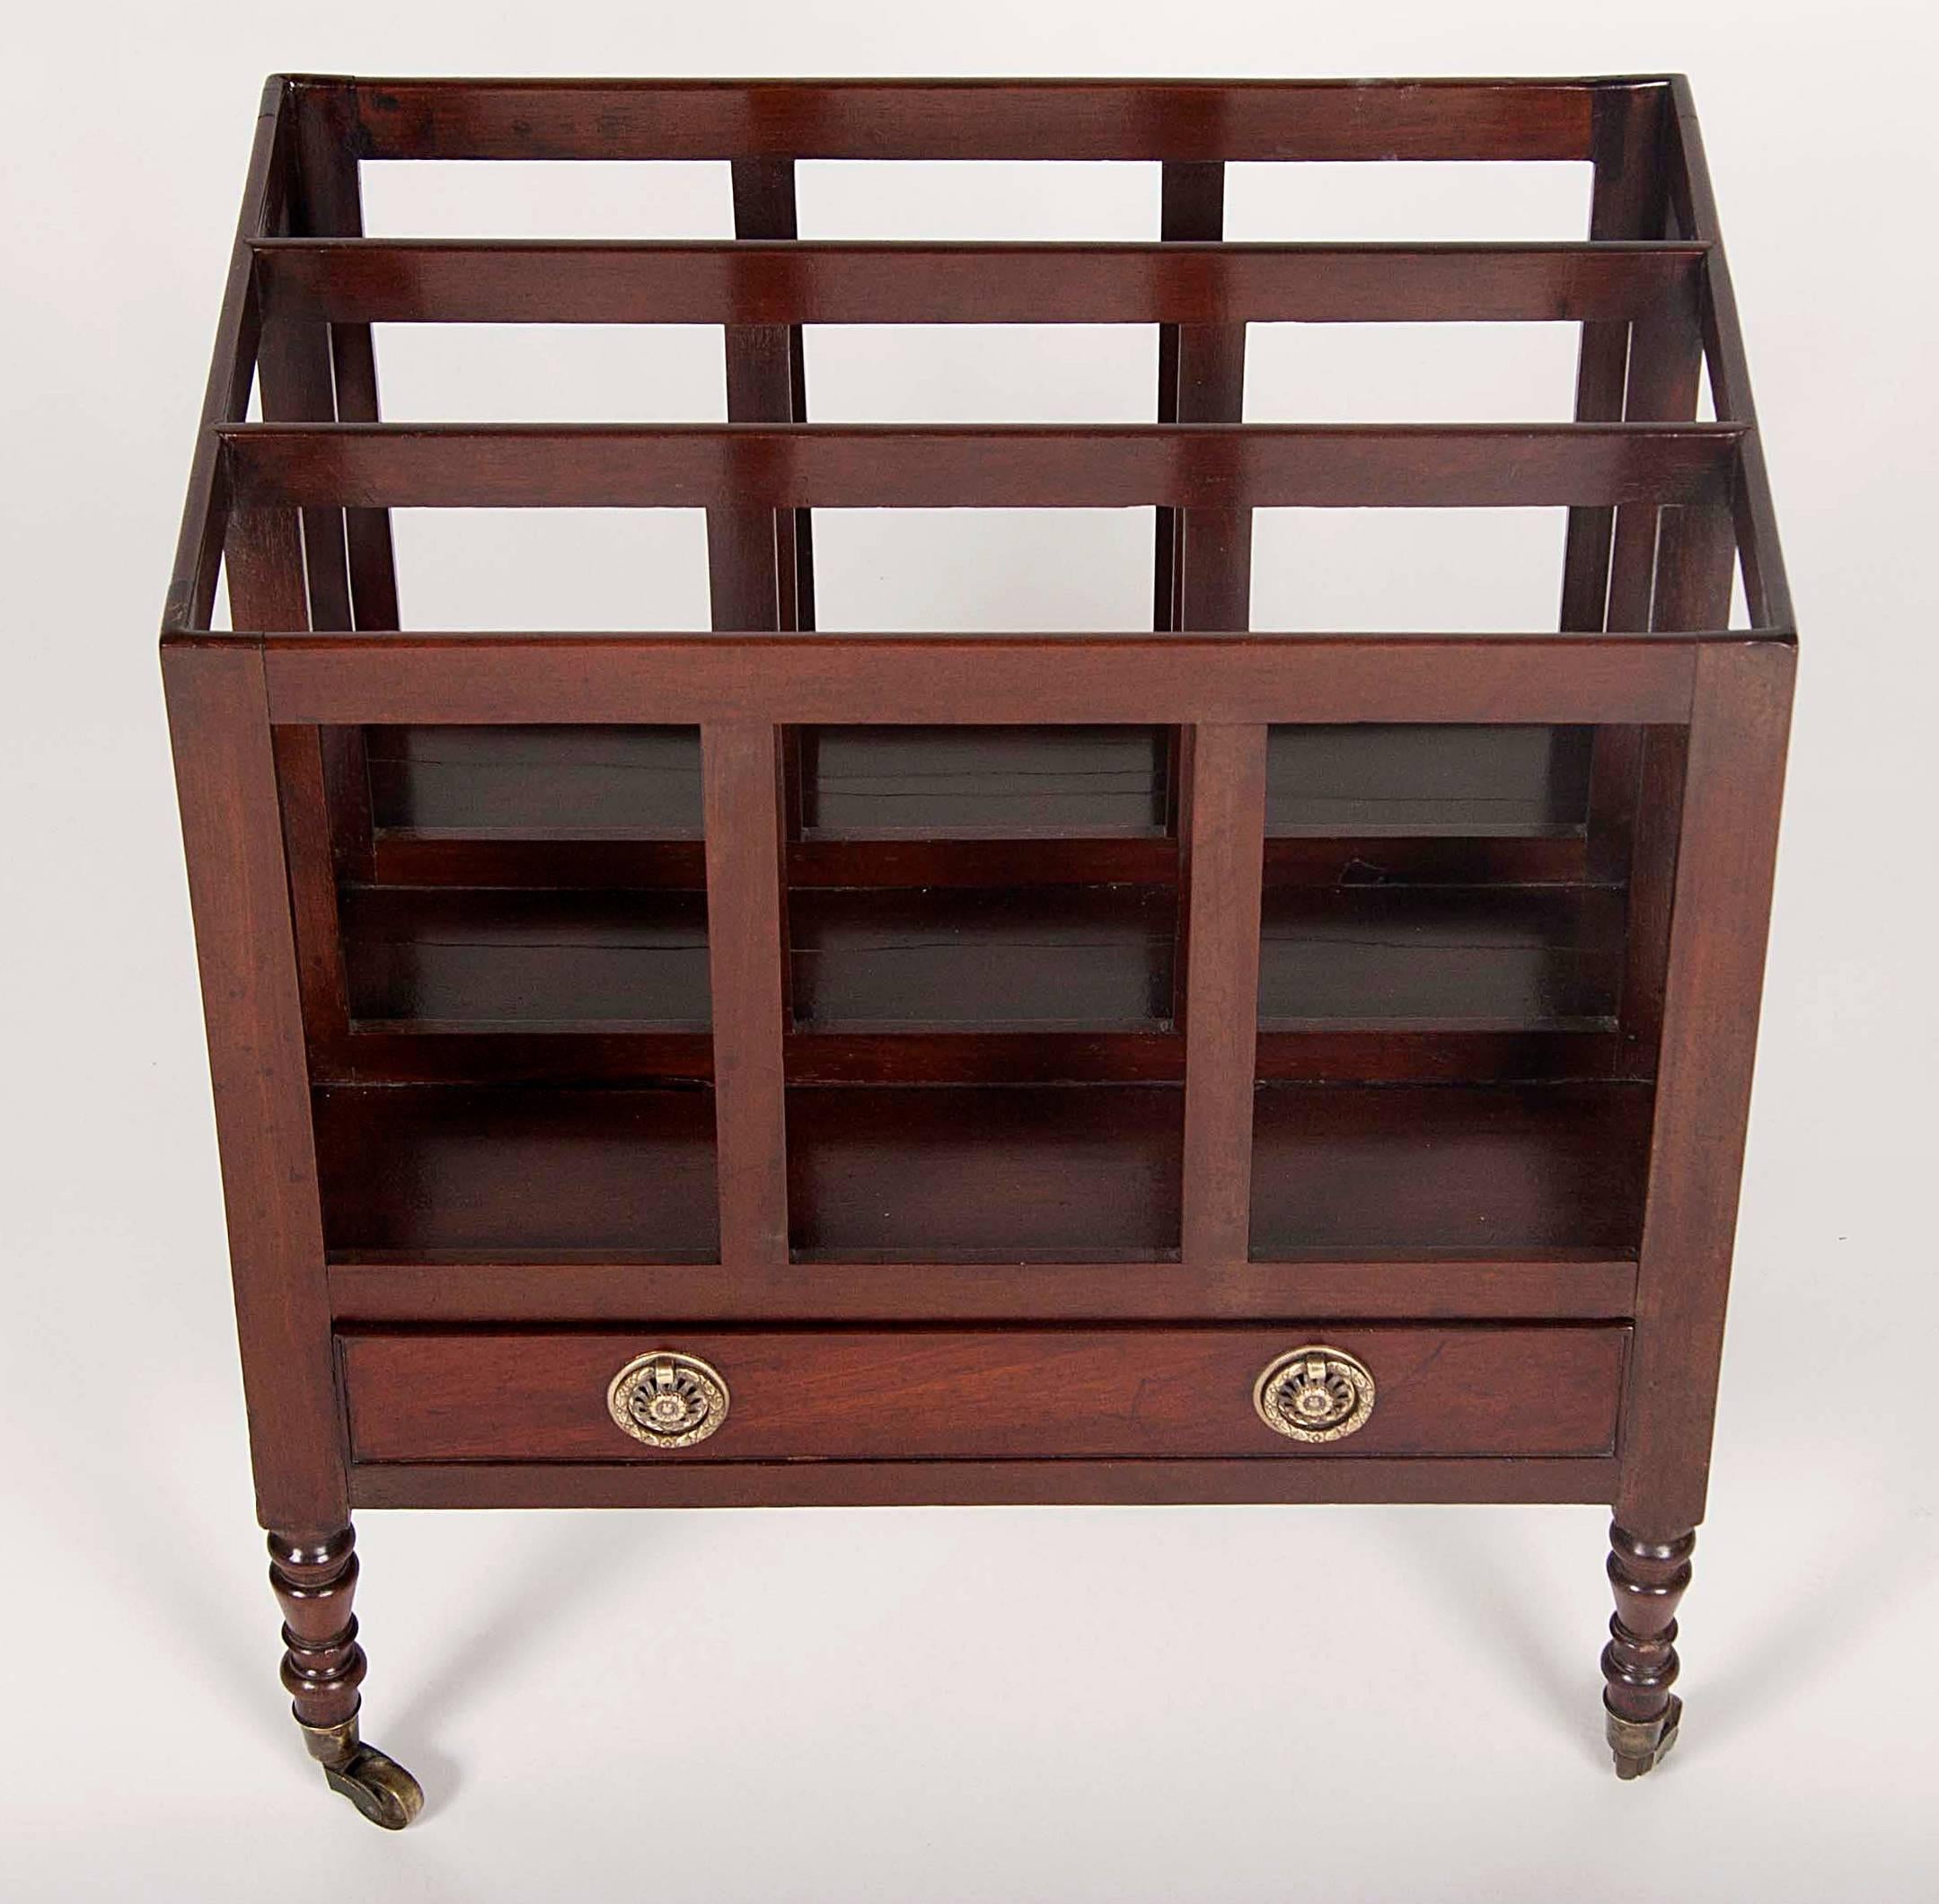 Rectangular with compartments over a drawer raised on turned legs and casters.